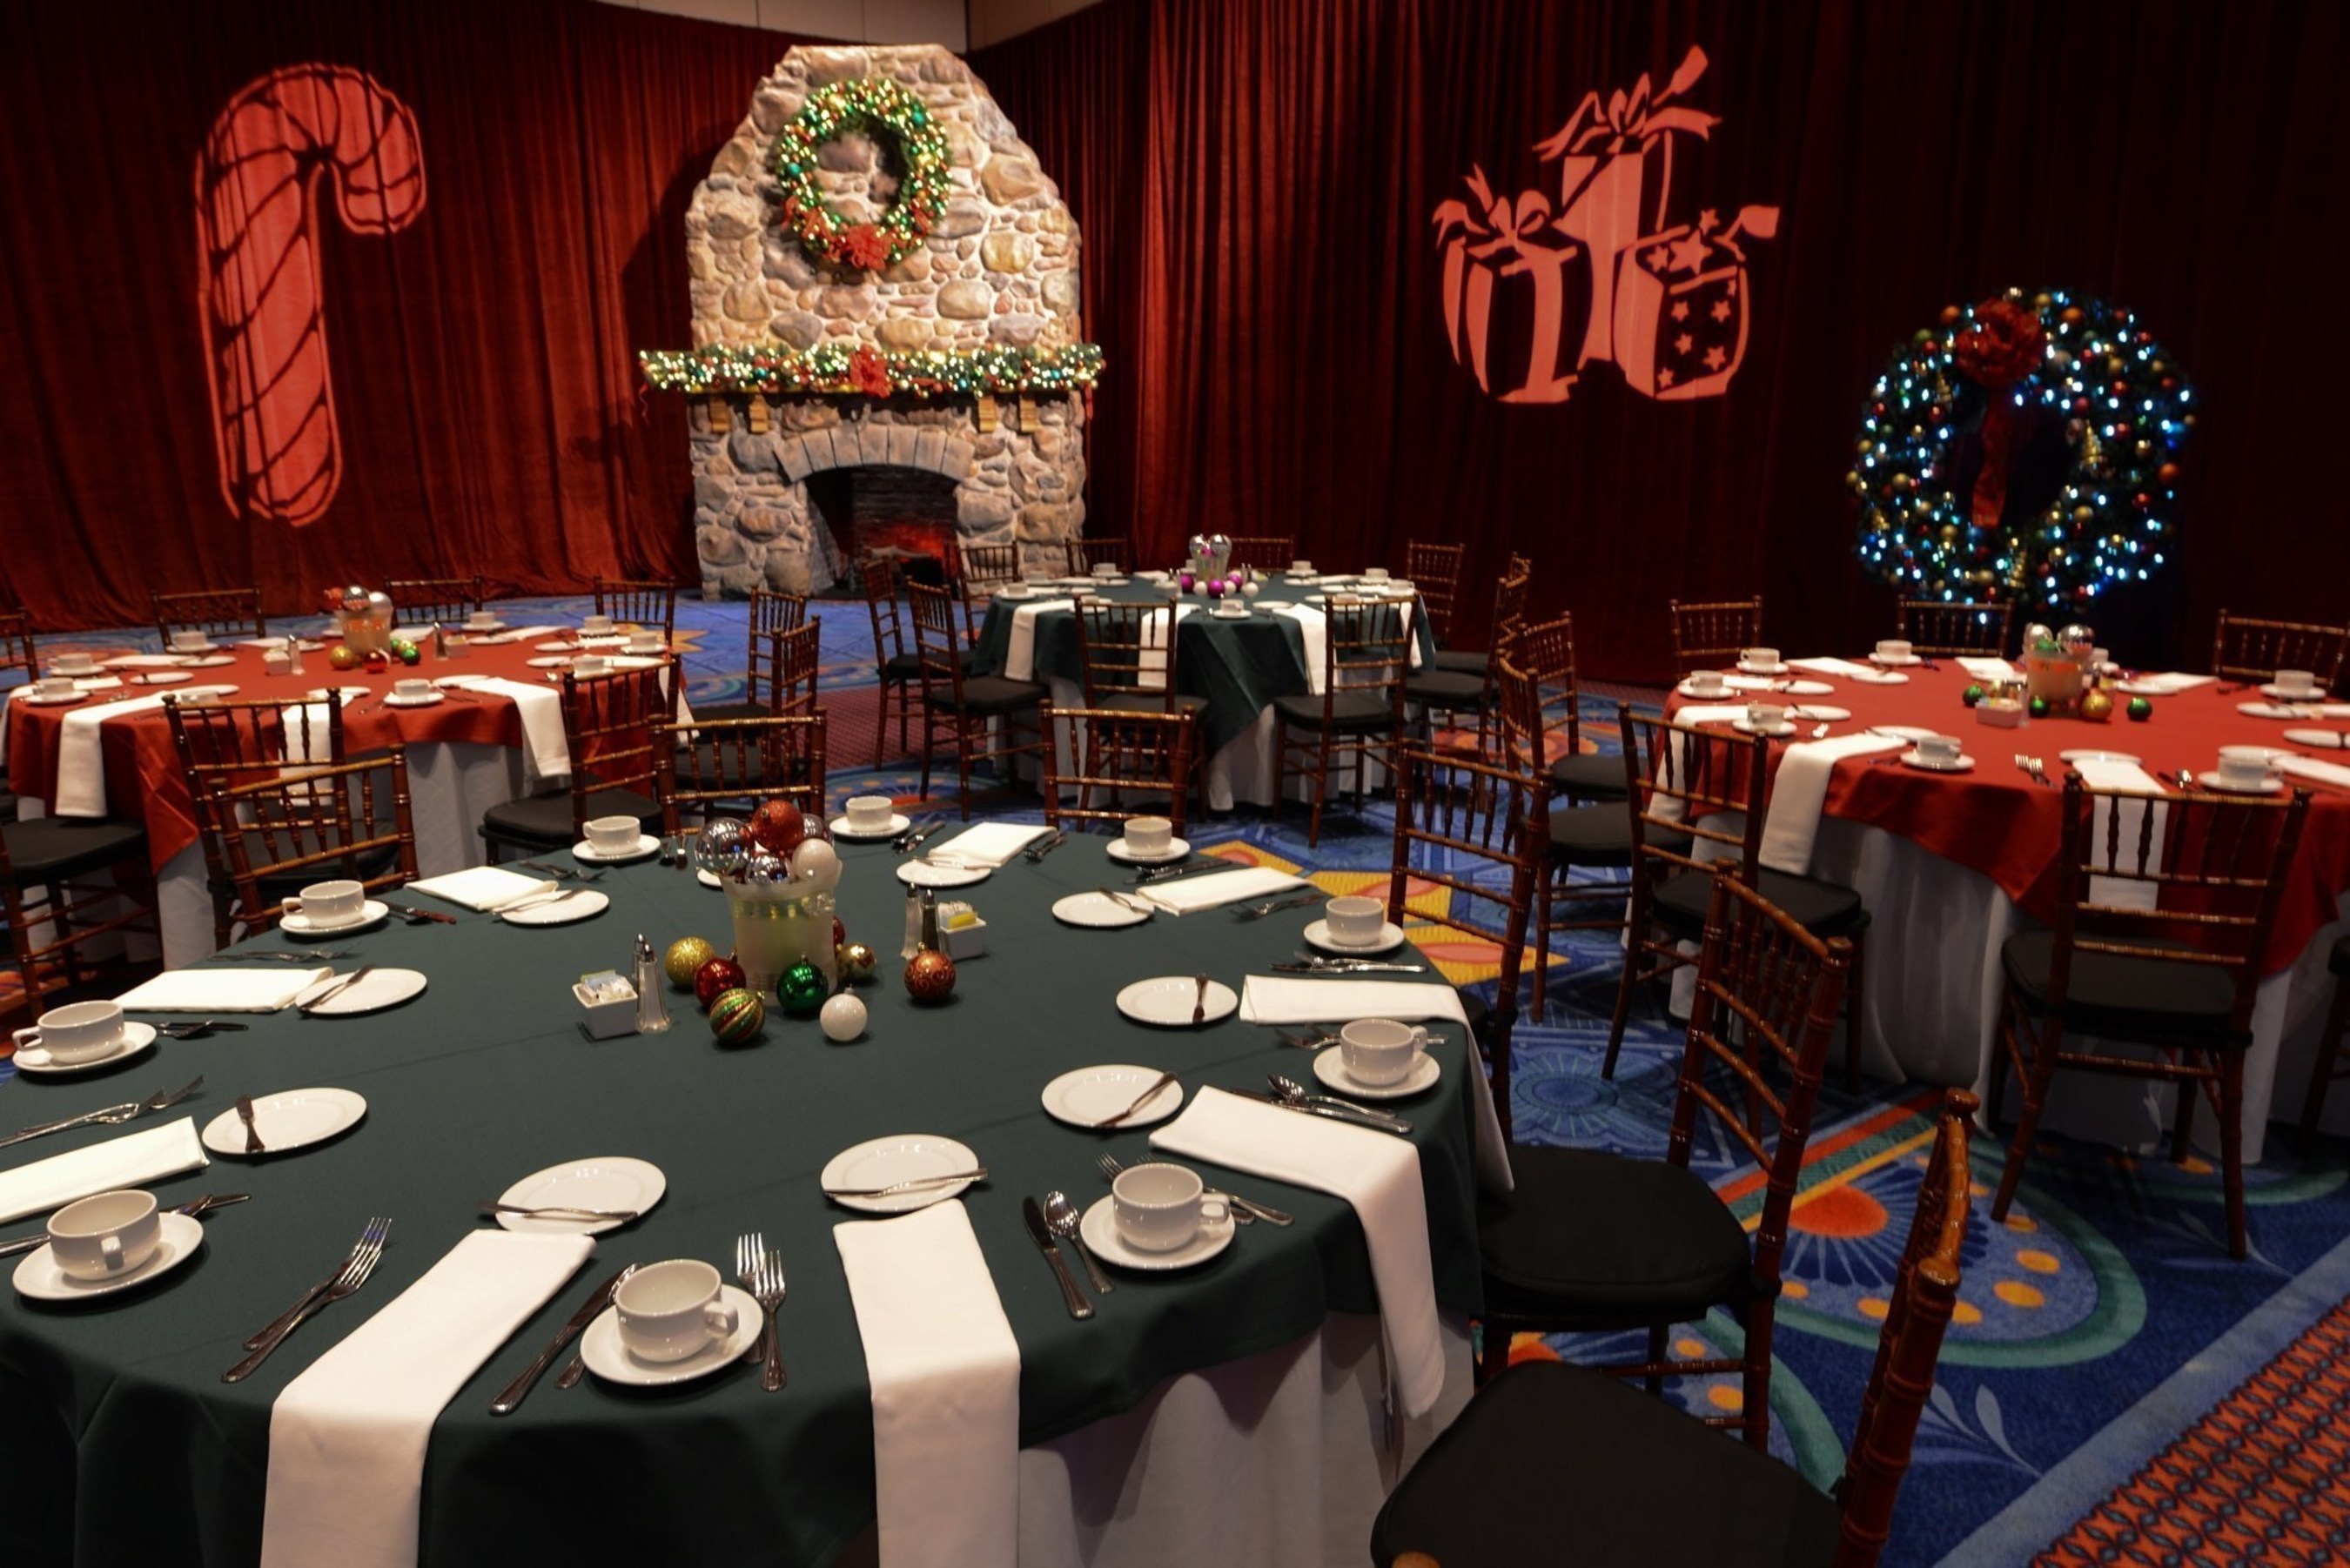 2016 Holiday Memories Catered Event Package at Walt Disney World Resort